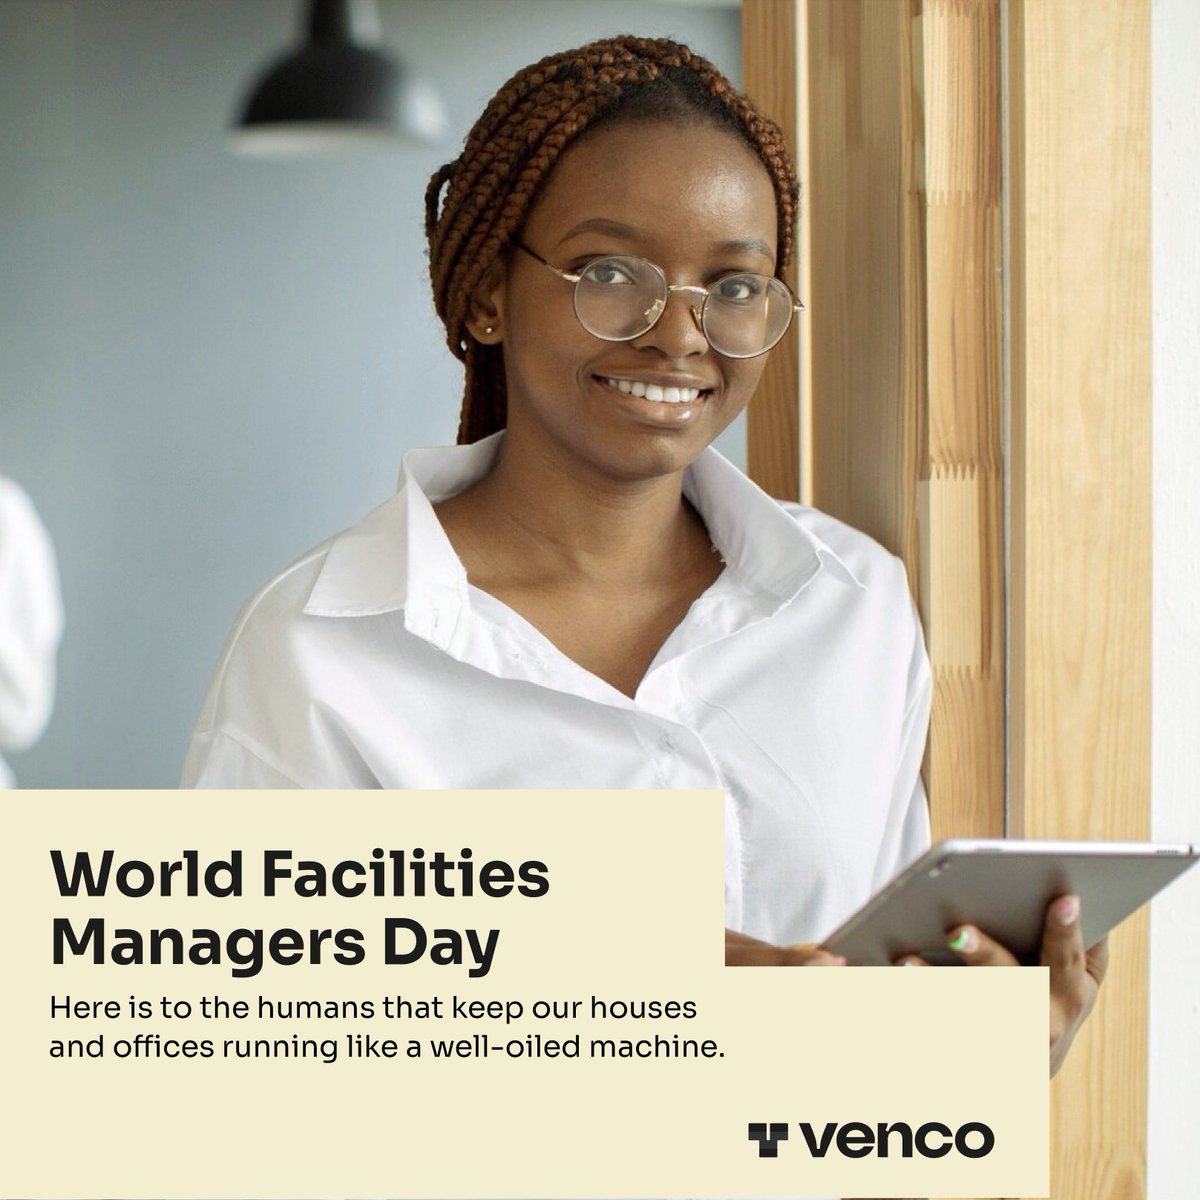 Today, we celebrate the men and women who keep our estates and commercial buildings running smoothly. Find the Facility Manager at your estate, favorite resort or office building and do something nice for them today, they deserve it 
#WorldFacilitiesManagersDay #WorldFMDay #Venco